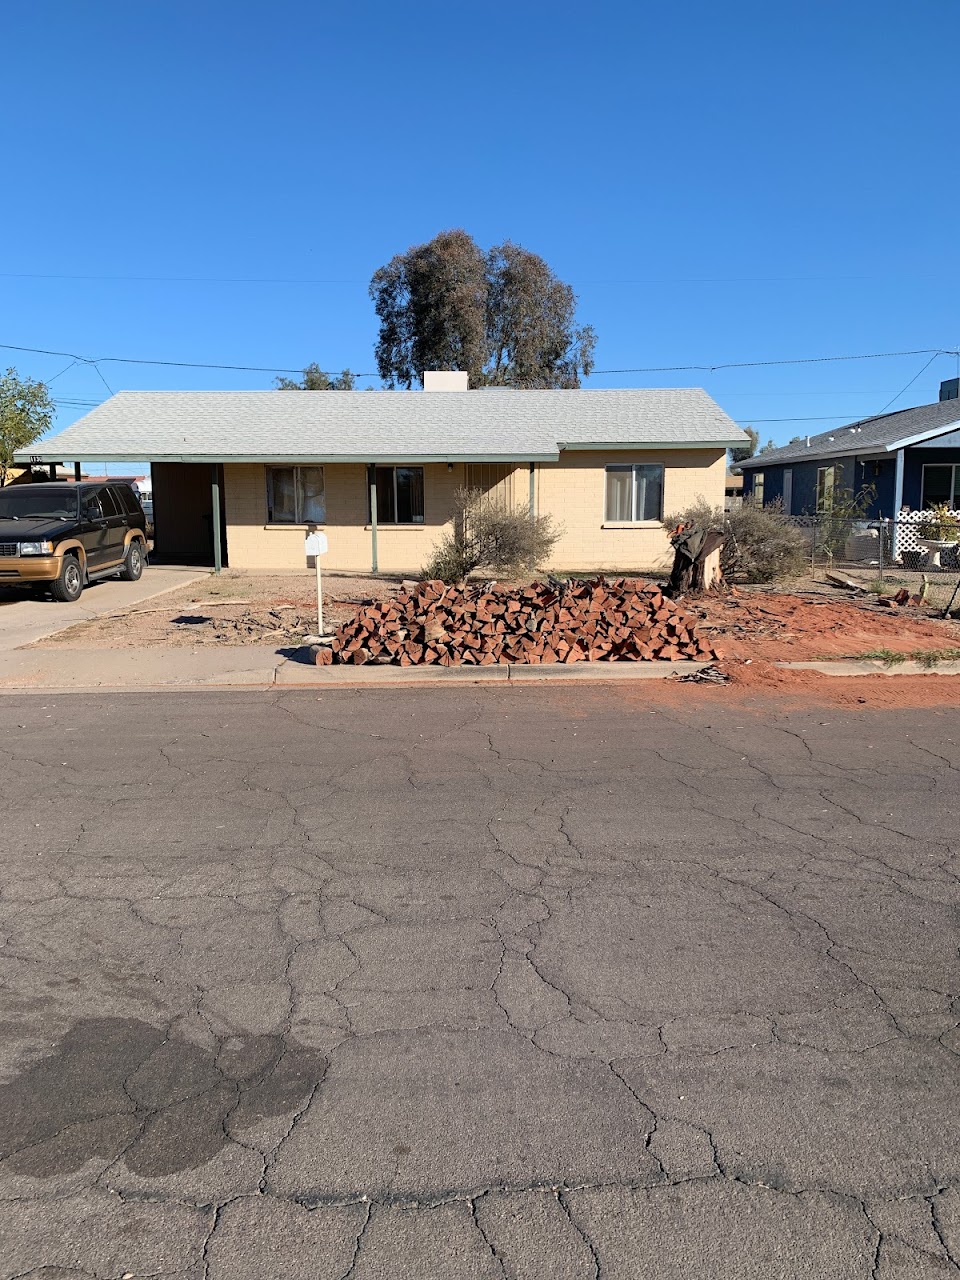 Photo of Pinal County Housing Authority. Affordable housing located at 970 N ELEVEN MILE CORNER Road CASA GRANDE, AZ 85222